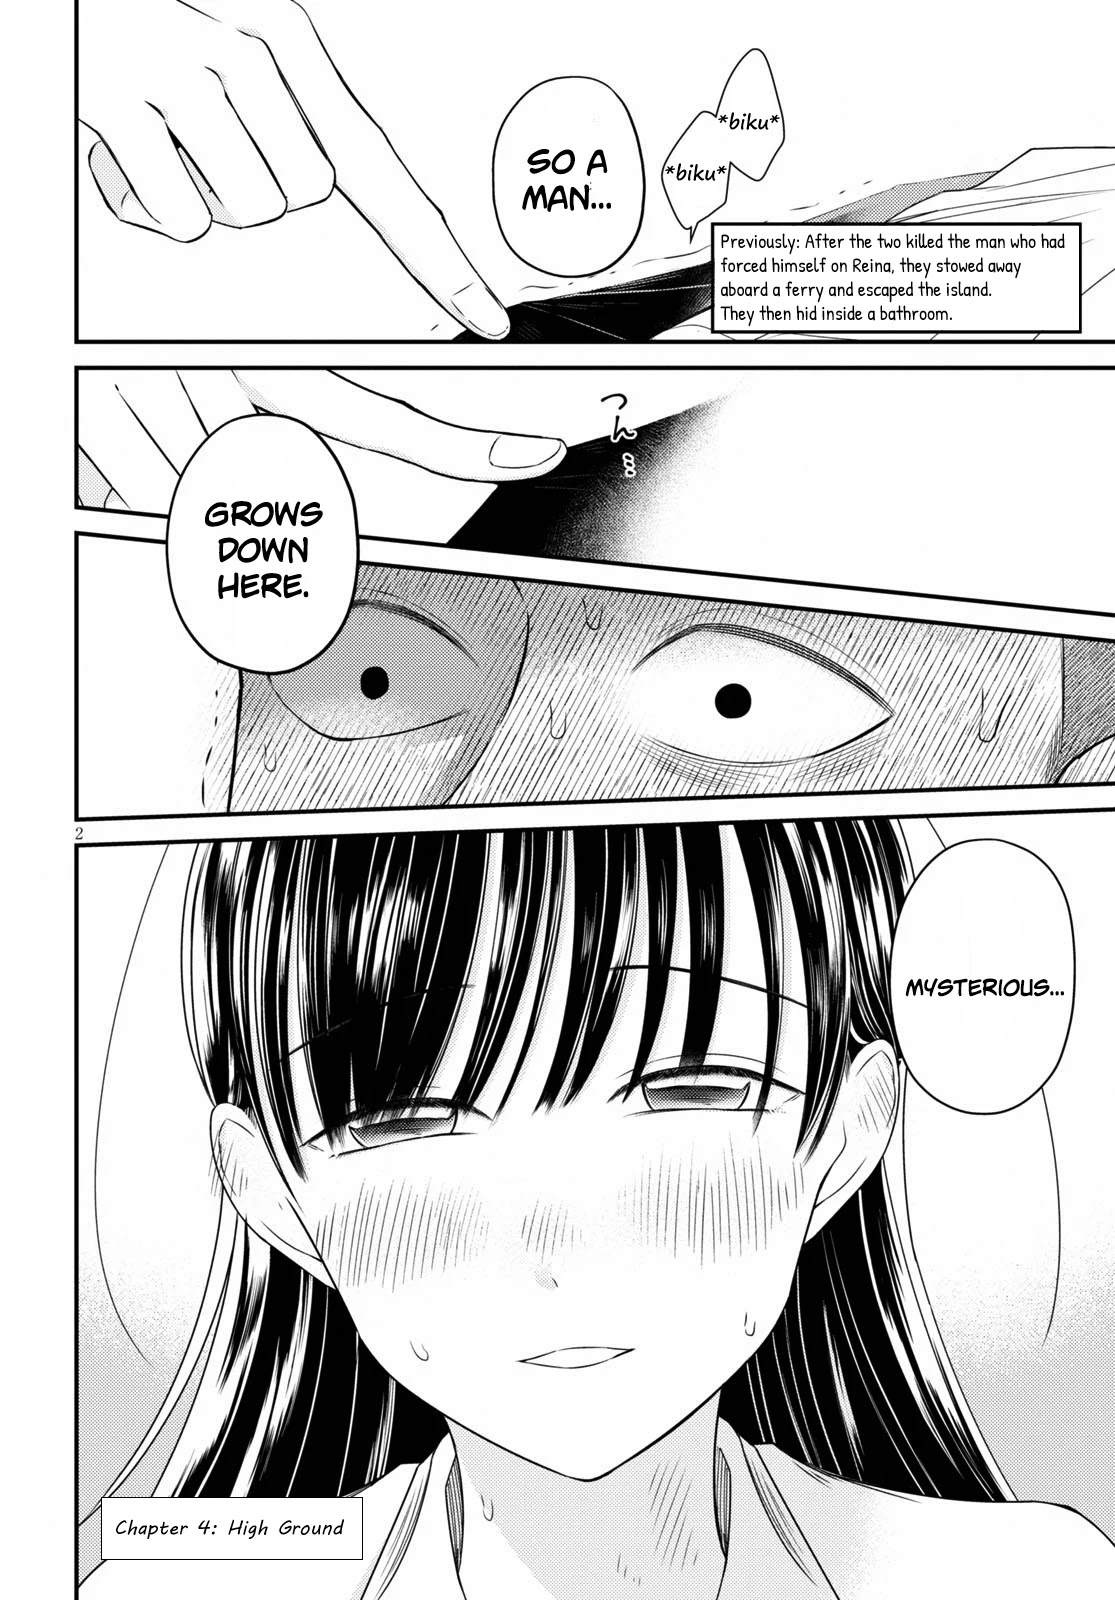 Kyouhan Chapter 4 #2